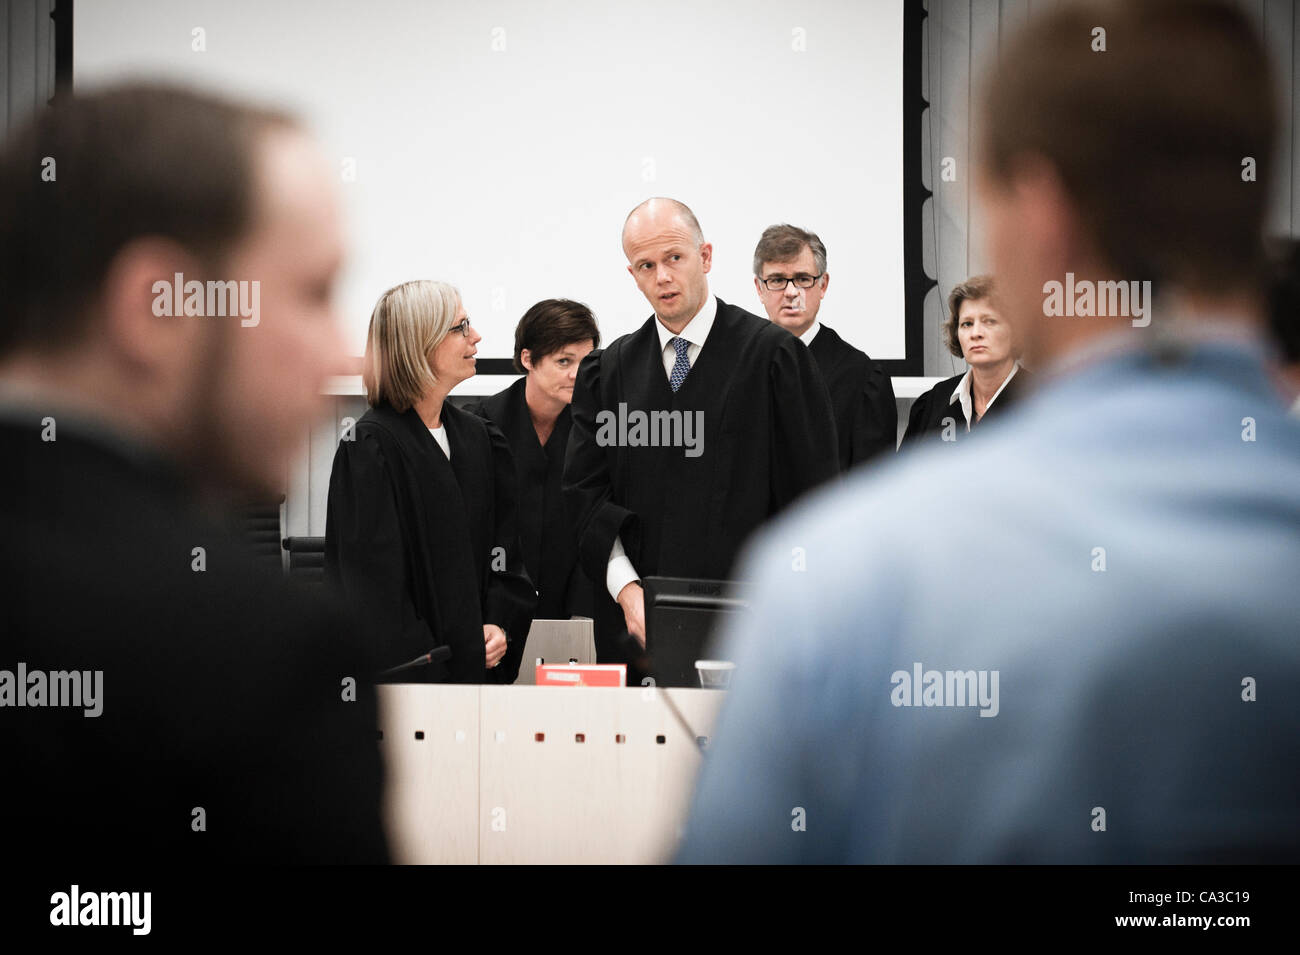 May 31, 2012 - Oslo, Norway: Counselors and prosecutors appears in the court during the trial against terrorist Anders Behring Brevik. From left in front, prosecutor Inga Bejer Engh and Svein Holden. From left in back, counsel Mette Yvonne Larsen, Frode Elgesem and Siv Hallgren. Stock Photo